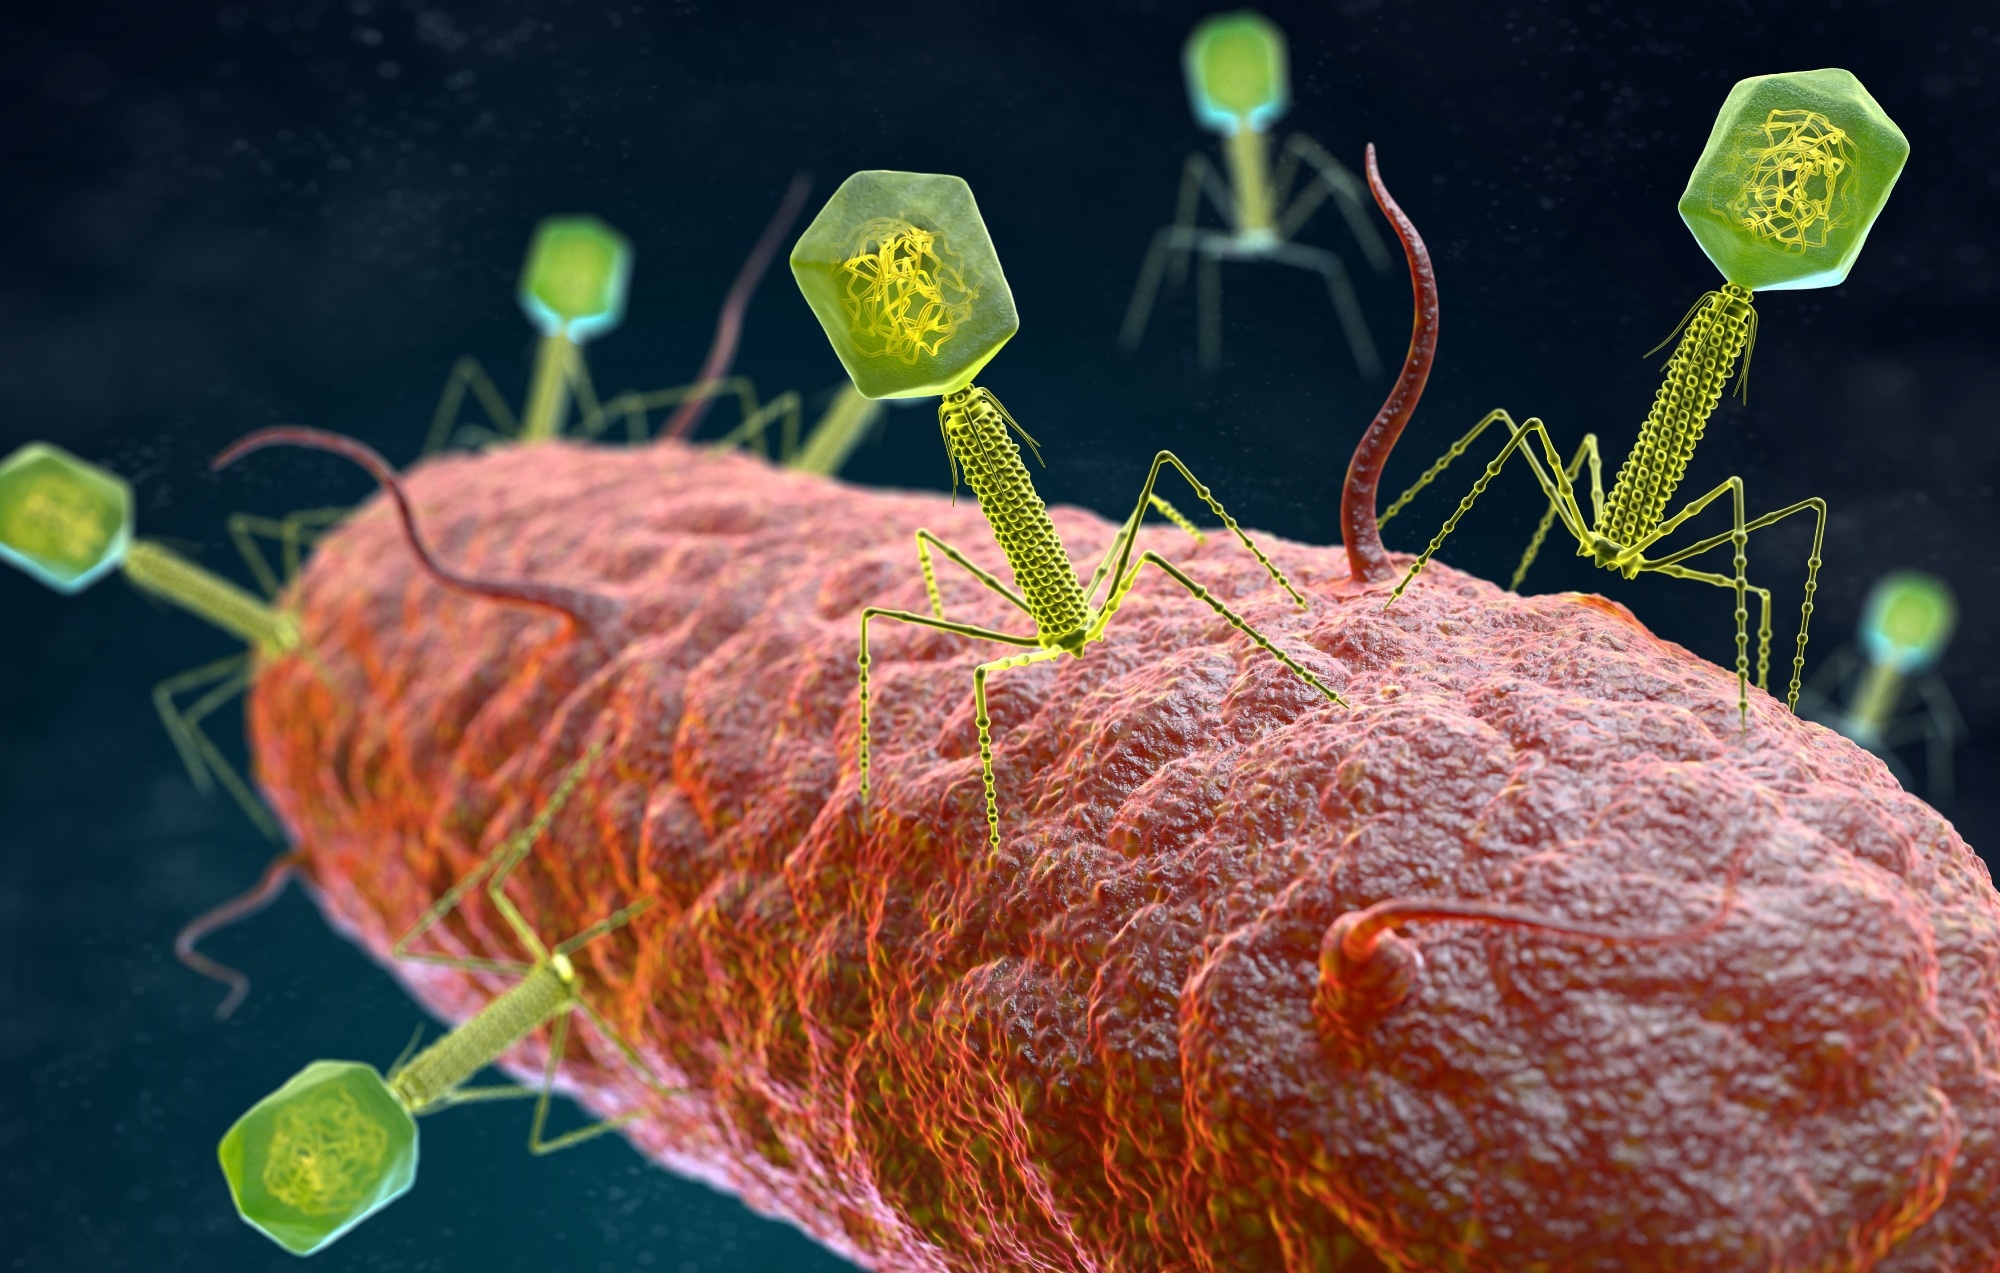 Study: Phage therapy: From biological mechanisms to future directions. Image Credit: Tatiana Shepeleva/Shutterstock